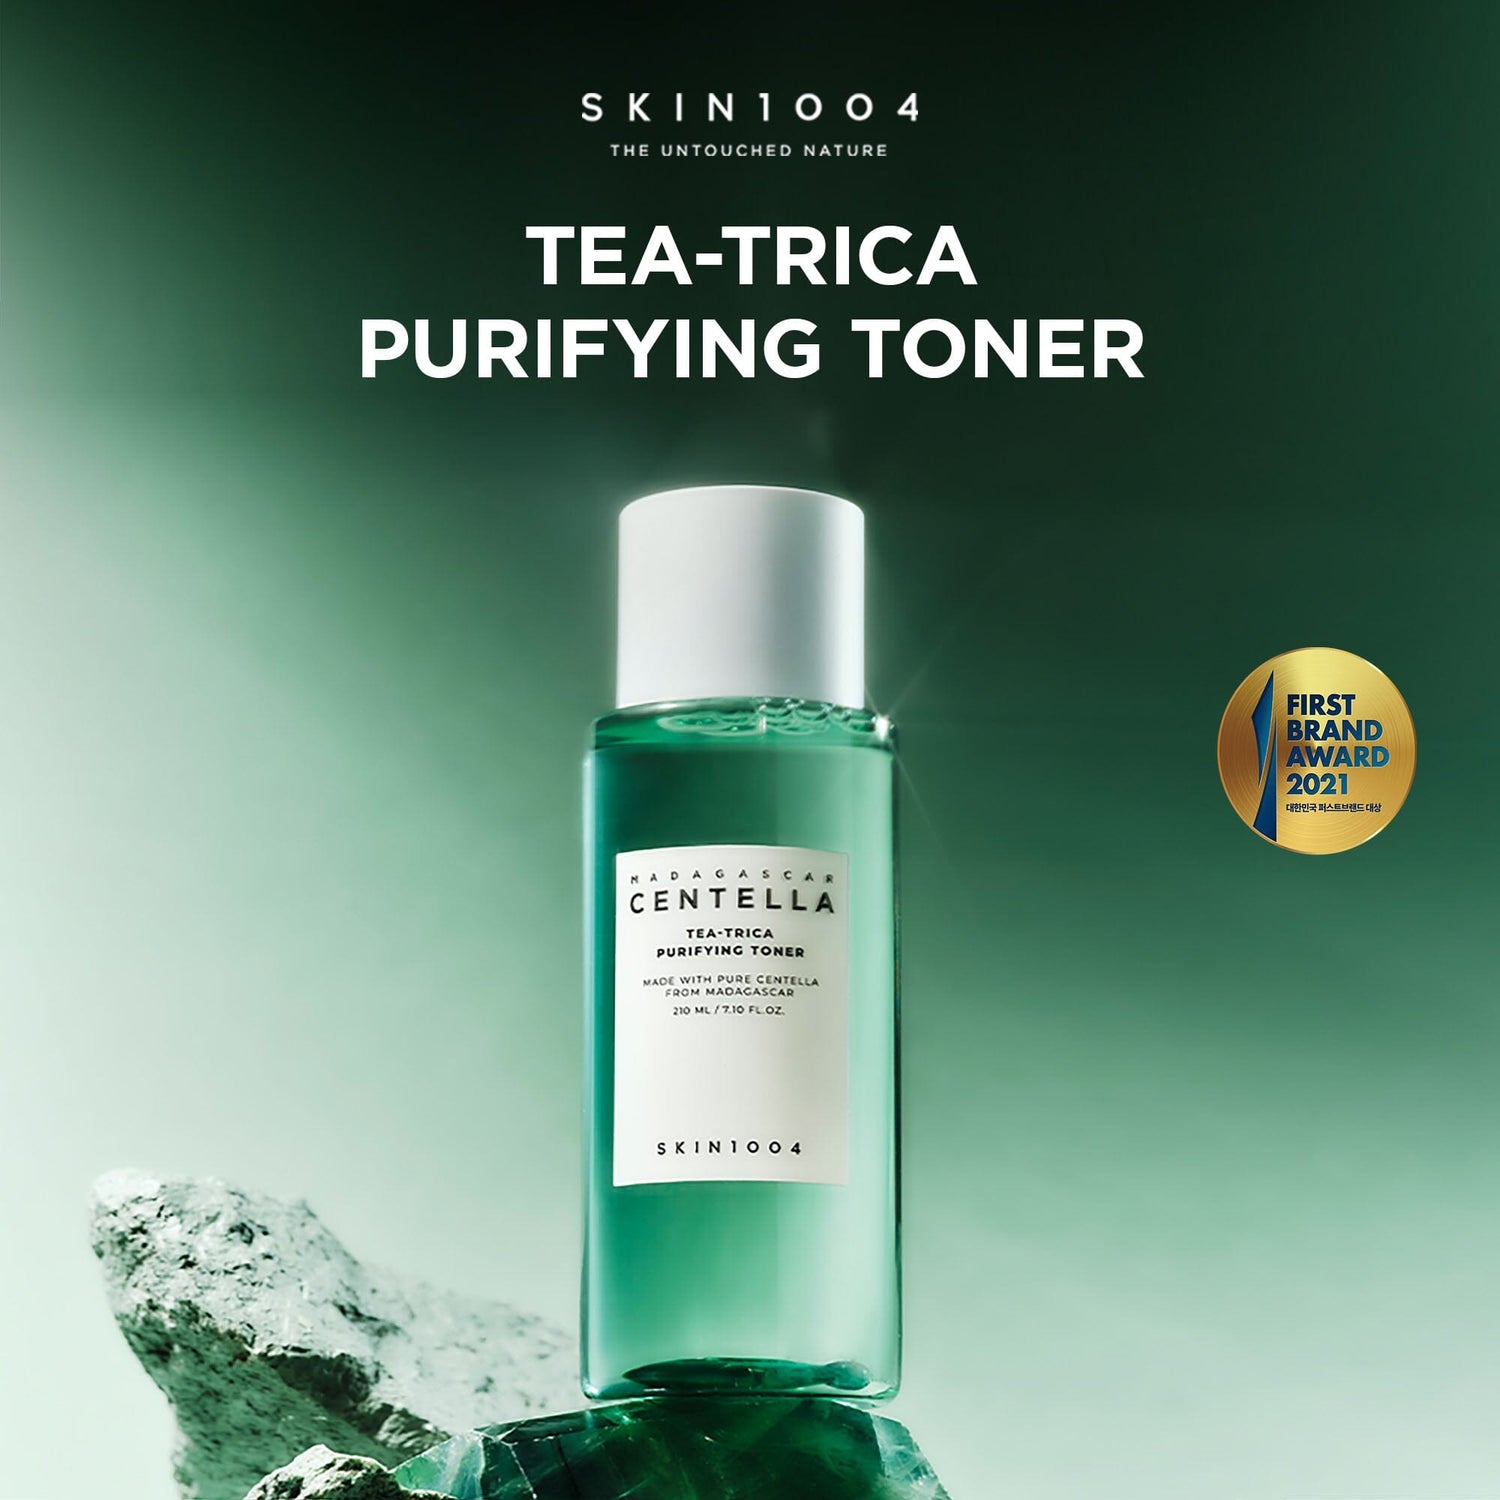 SKIN1004 Madagascar Centella Tea-Trica Purifying Toner 210ml, at Orion Beauty. SKIN1004 Official Sole Authorized Retailer in Sri Lanka!